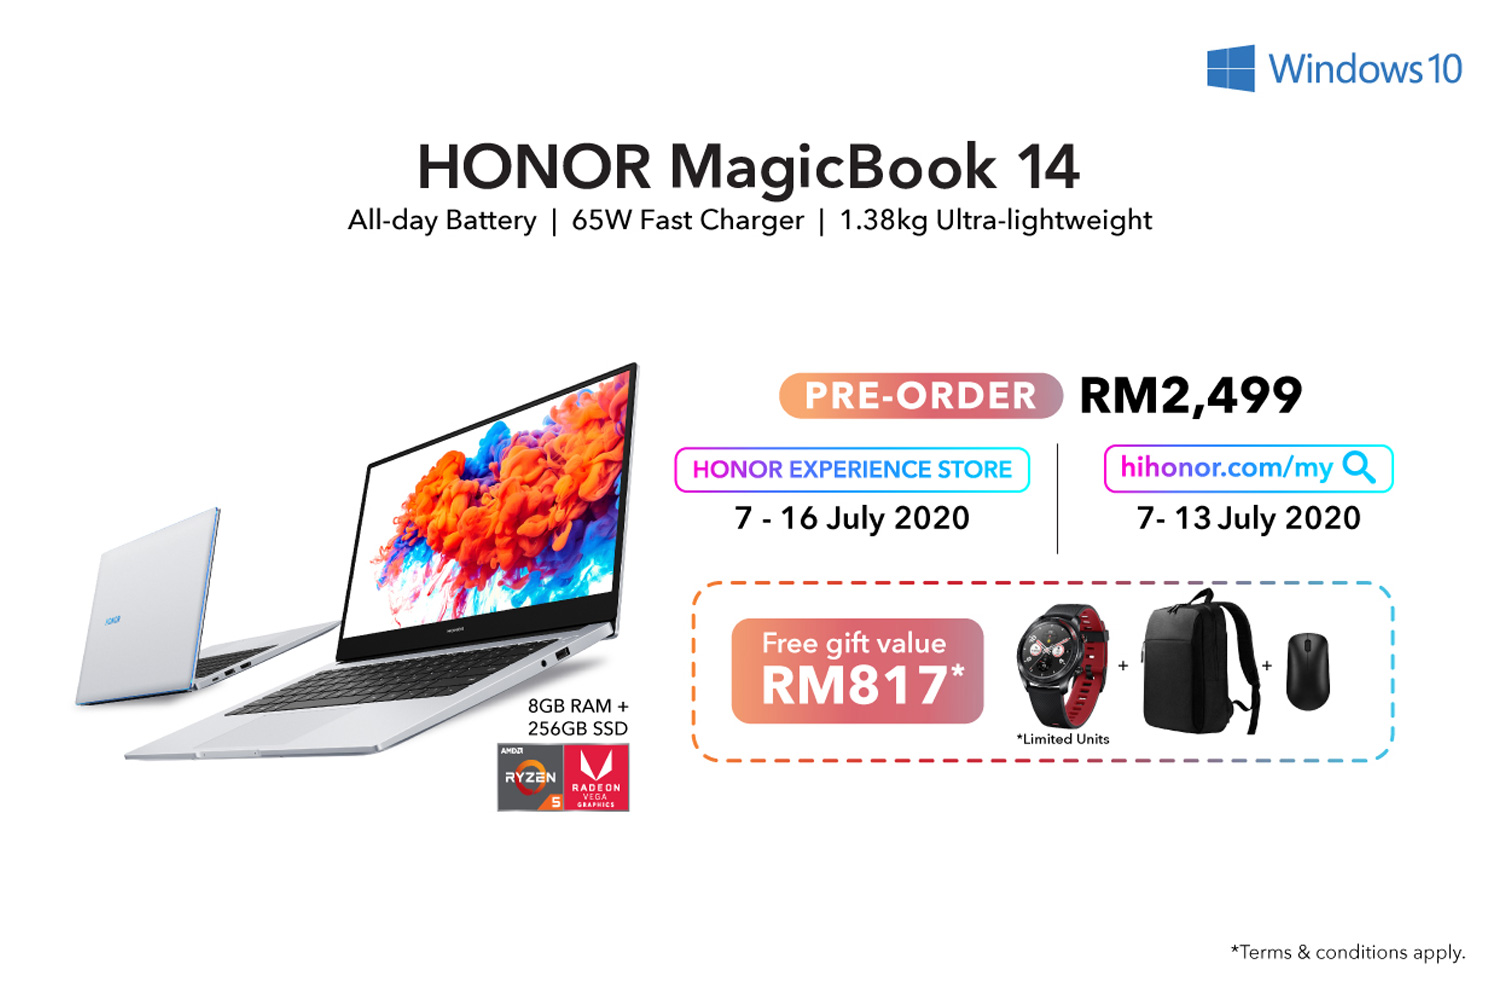 You Can Now Pre-Order the HONOR MagicBook 14